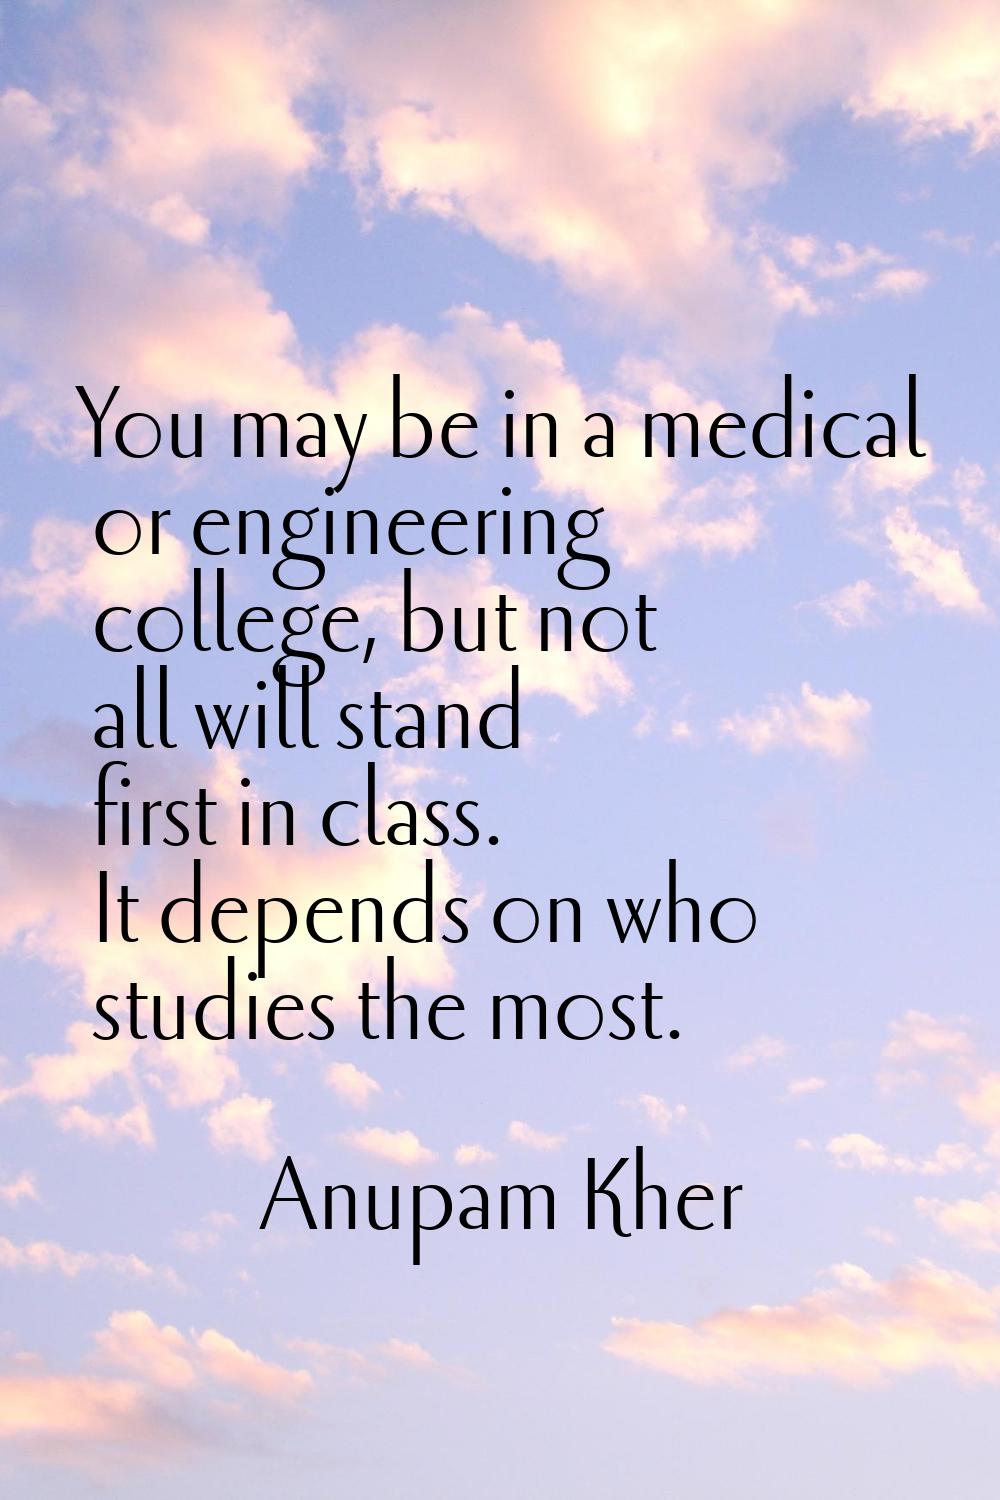 You may be in a medical or engineering college, but not all will stand first in class. It depends o